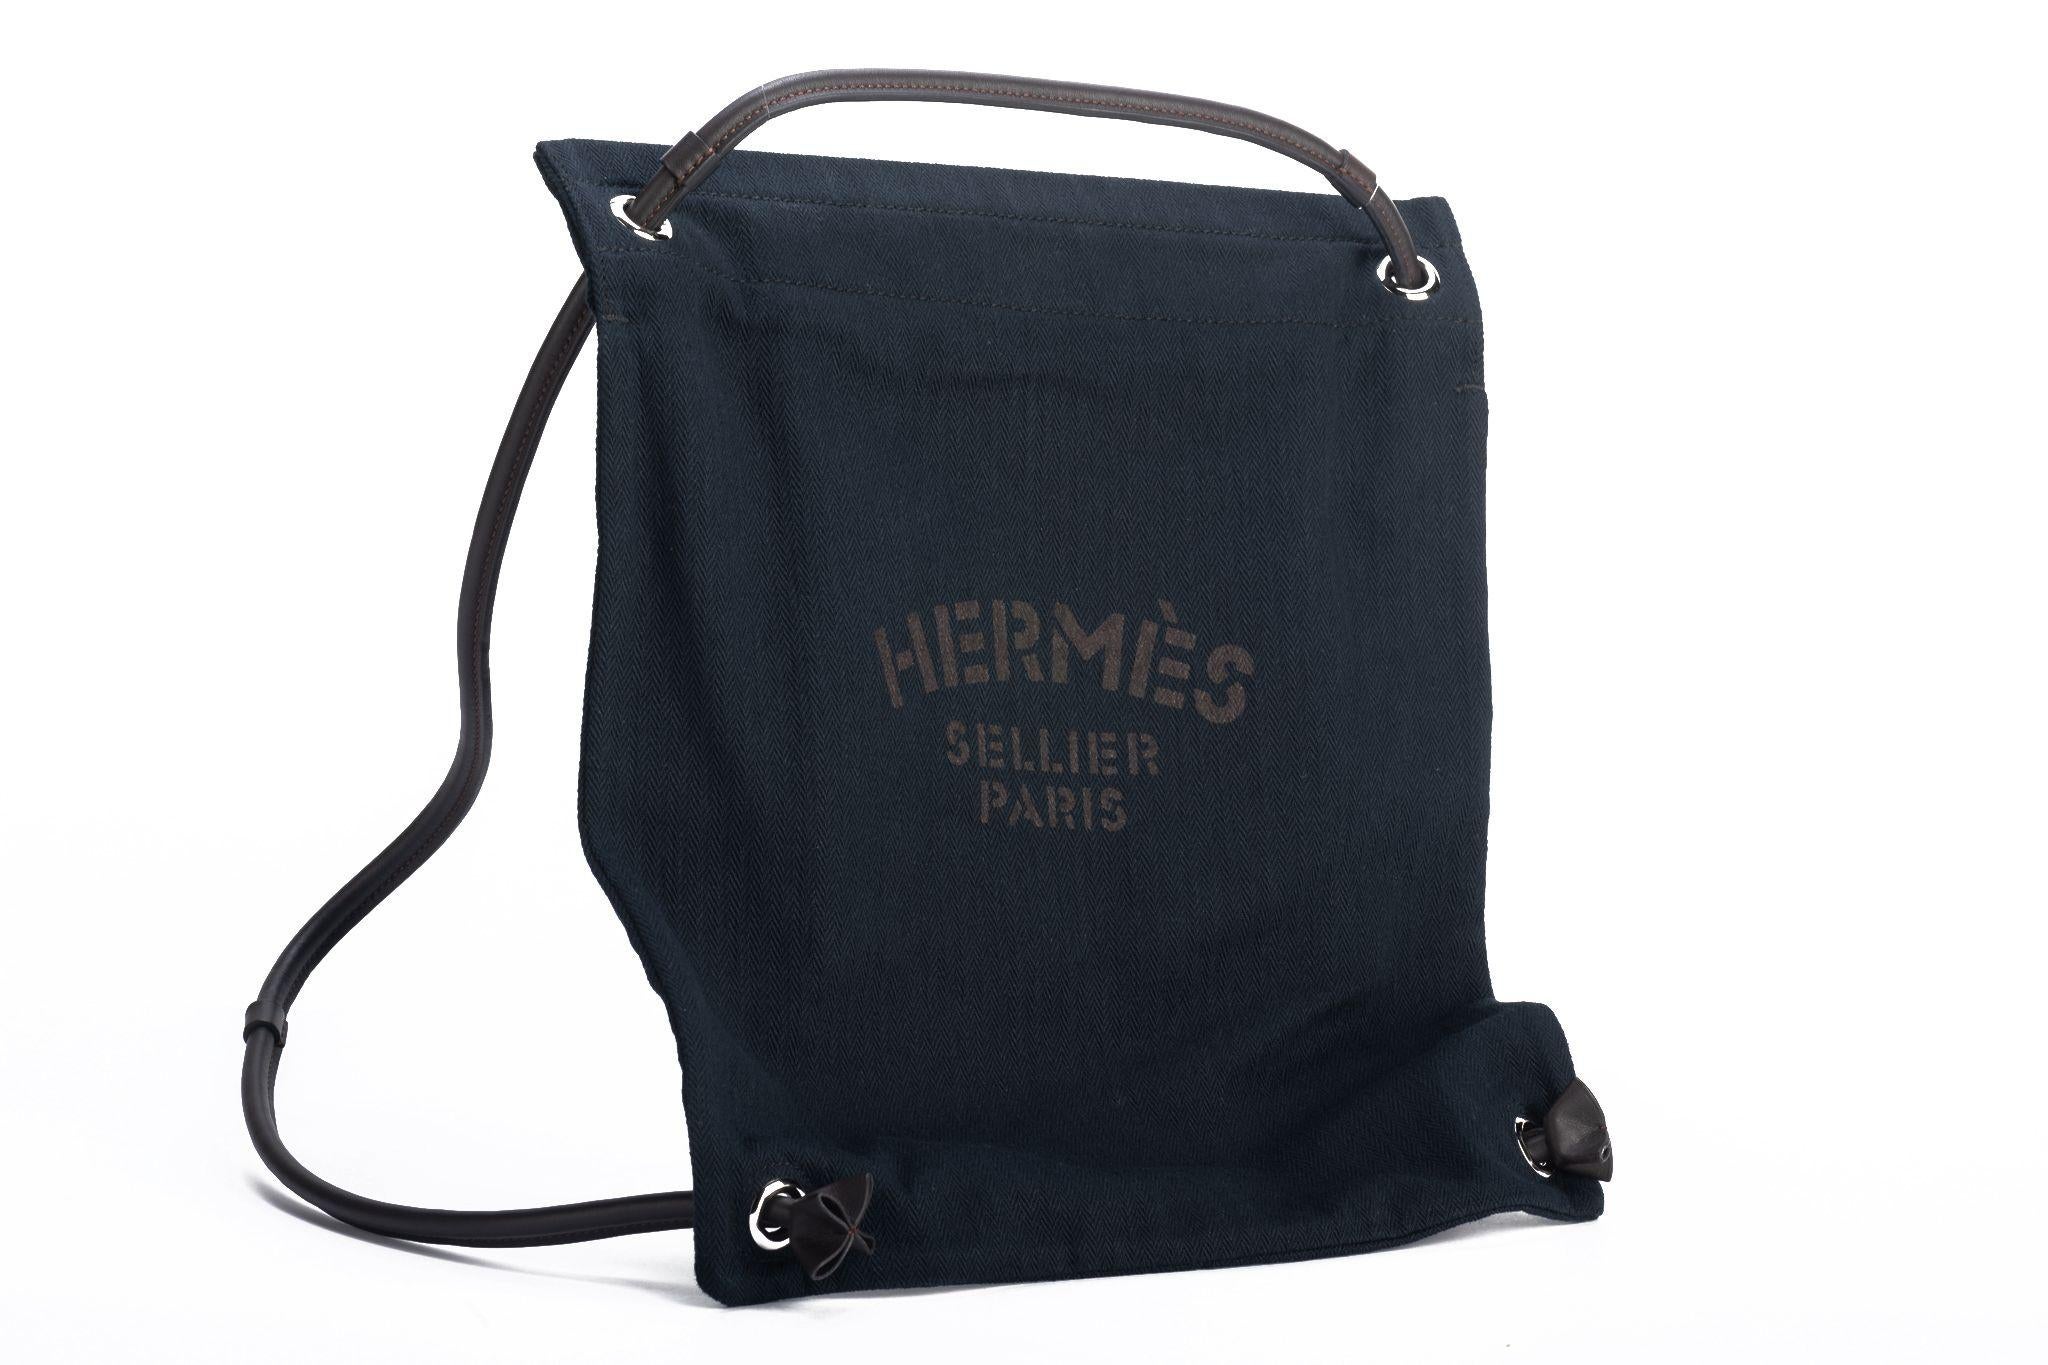 Hermes black herringbone toile feed bag with black leather straps . Can be worn as a shoulder bag or as a backpack. Shoulder drop 17” . Original dust cover .